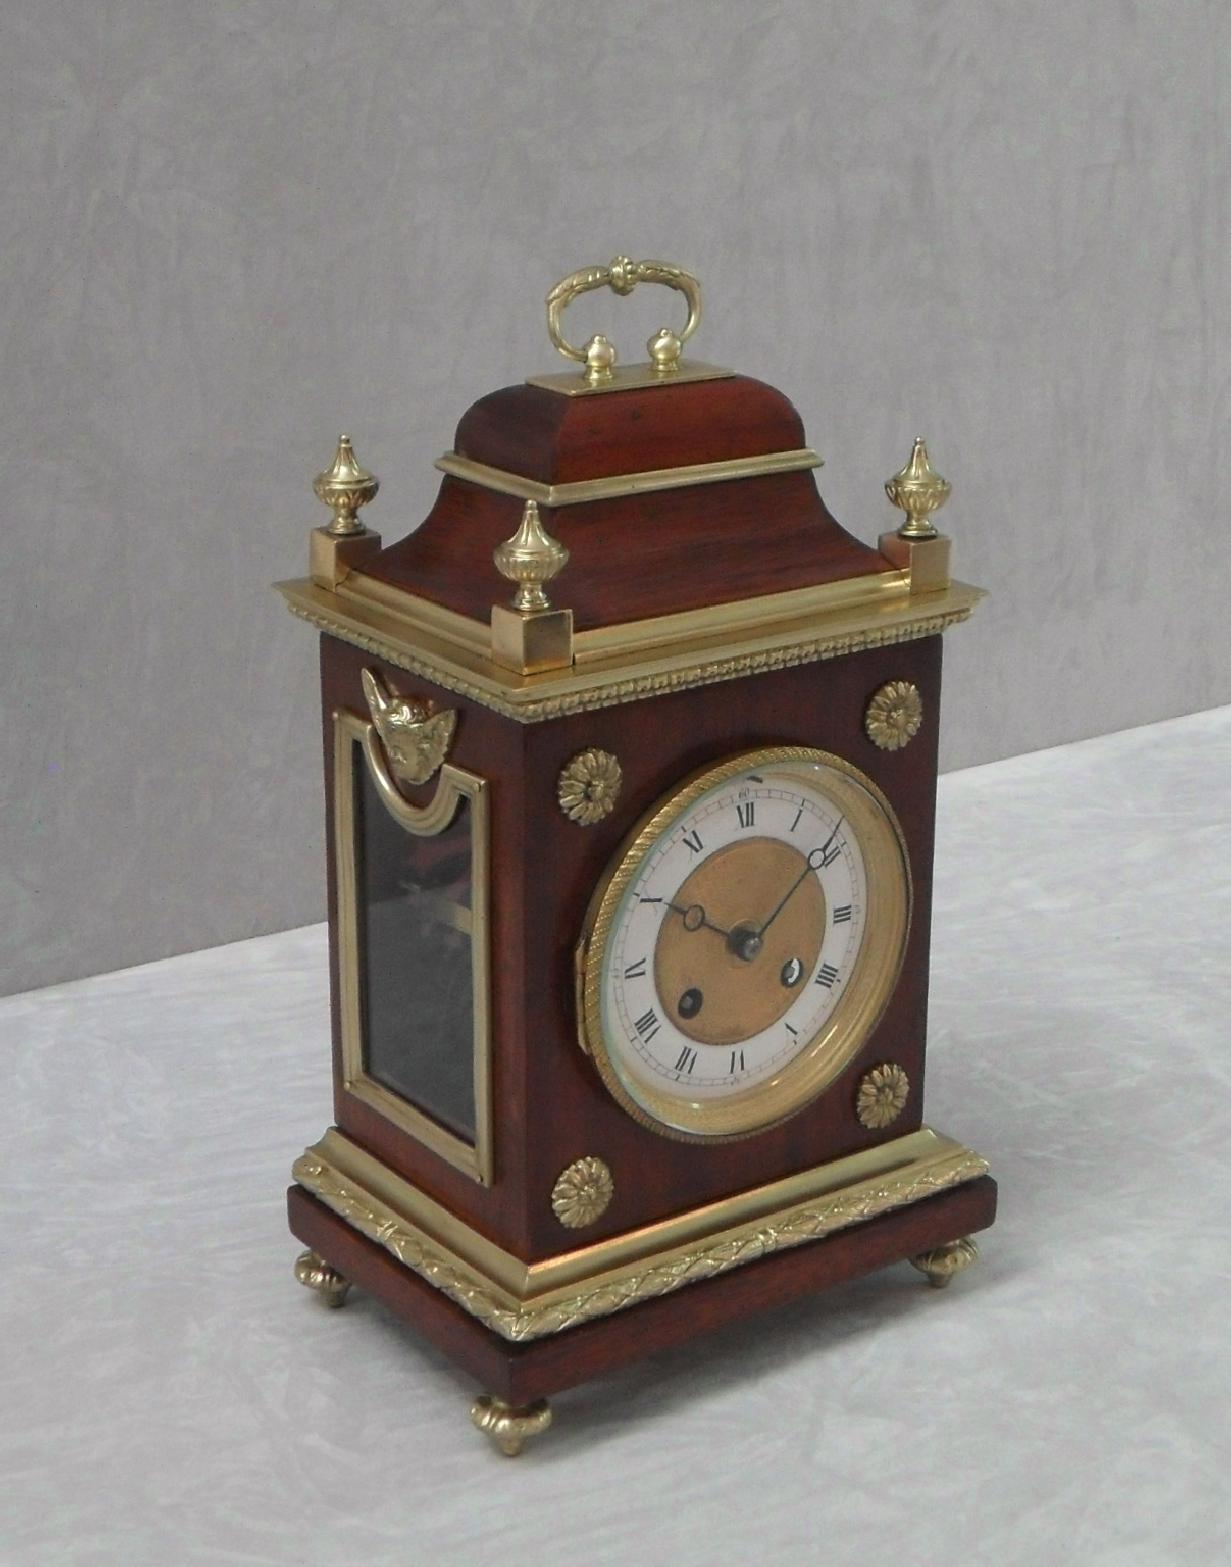 Gilt French Belle Epoque Mahogany Mantel Clock with Side Viewing Windows